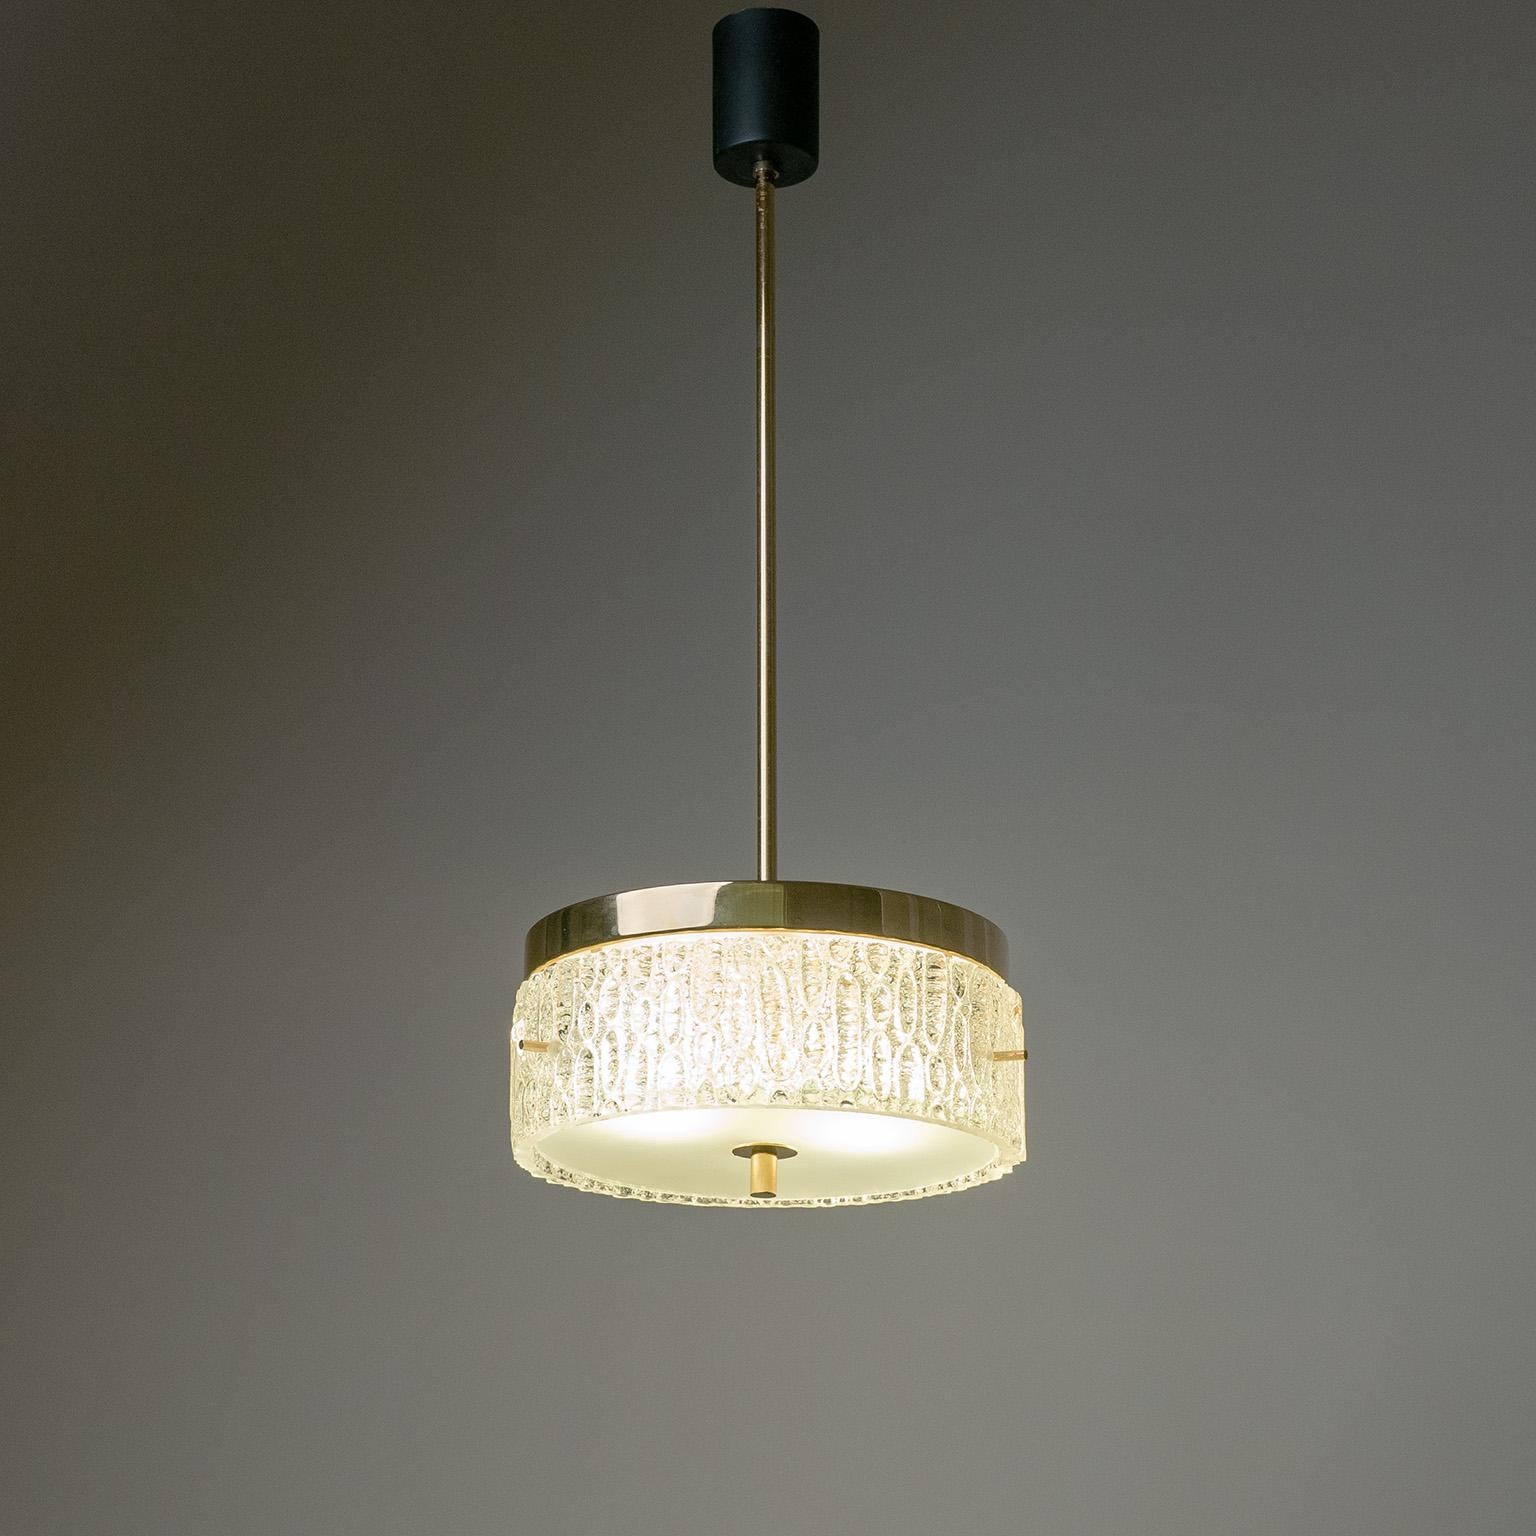 Mid-20th Century French Modern Pendant, 1960s, Textured Glass and Gilt Brass For Sale